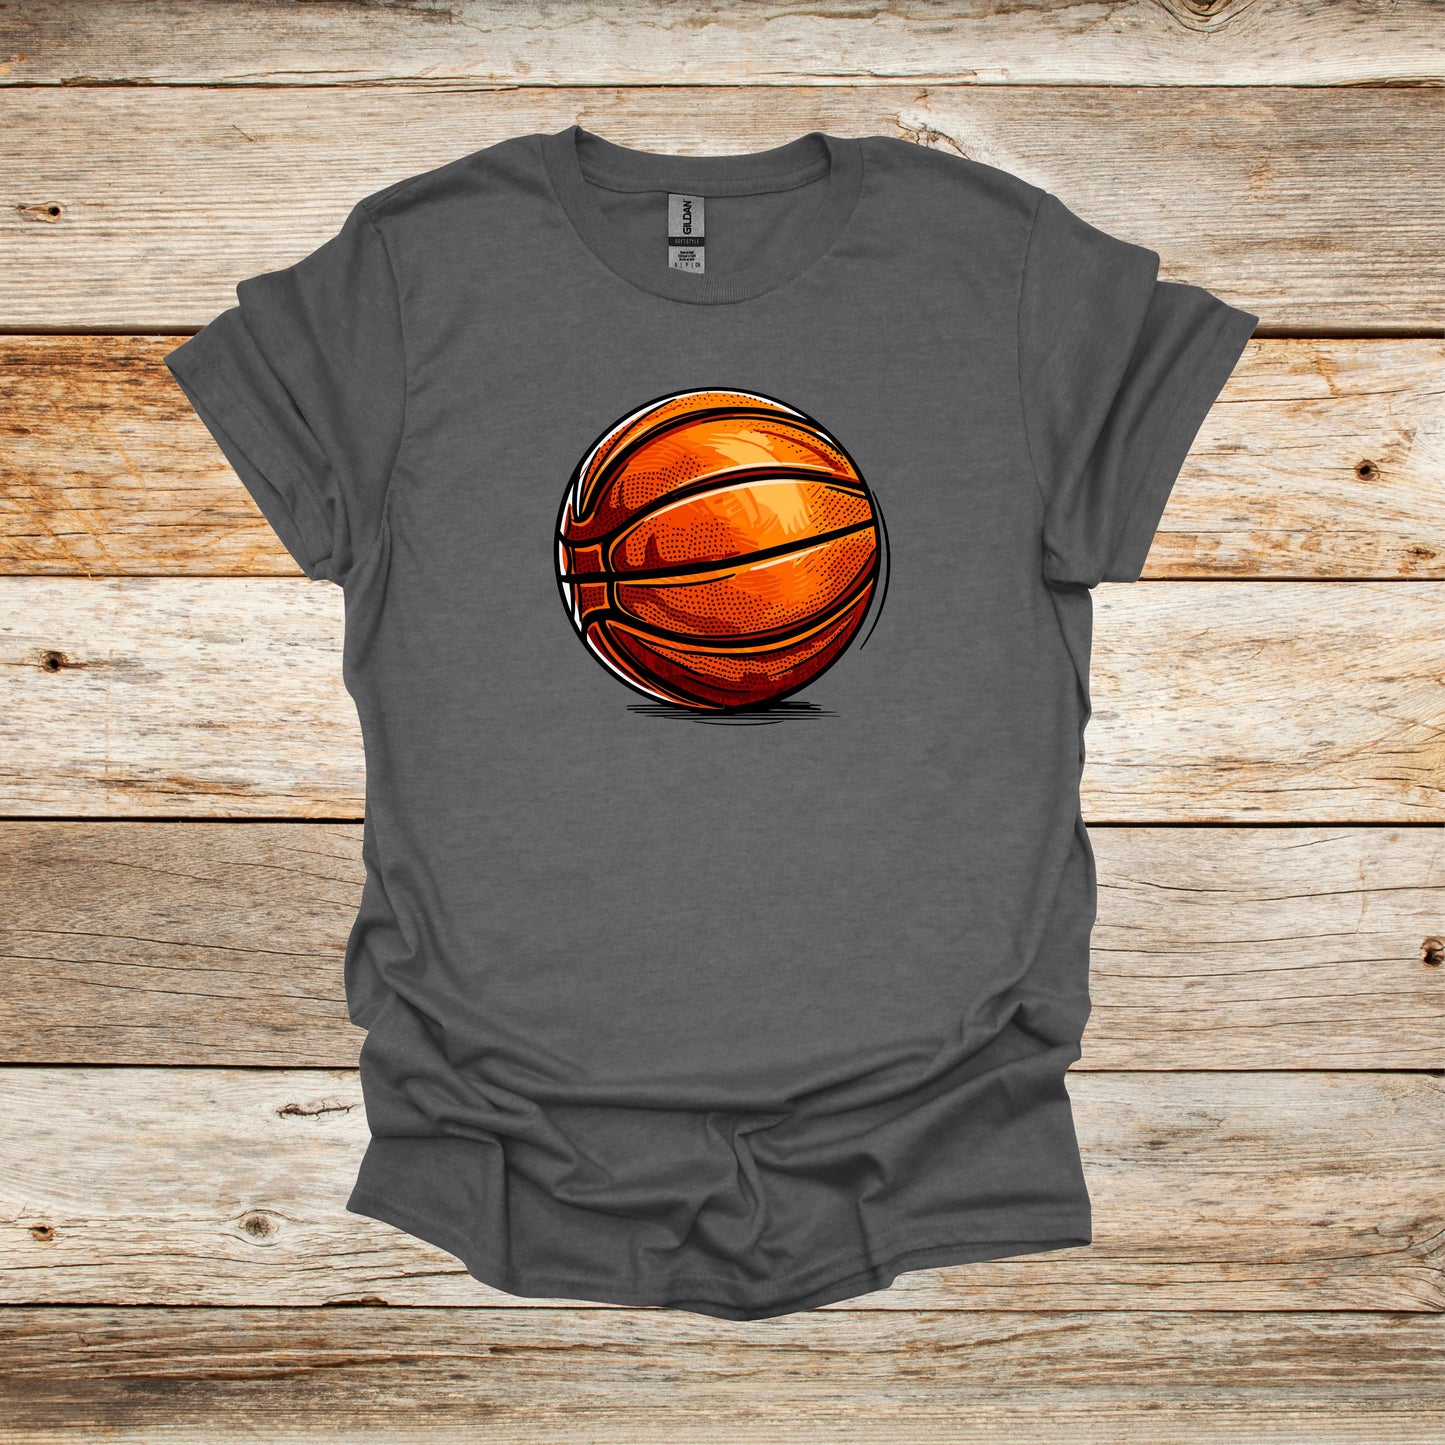 Basketball T-Shirt - Adult and Children's Tee Shirts - Sports T-Shirts Graphic Avenue Graphite Heather Adult Small 